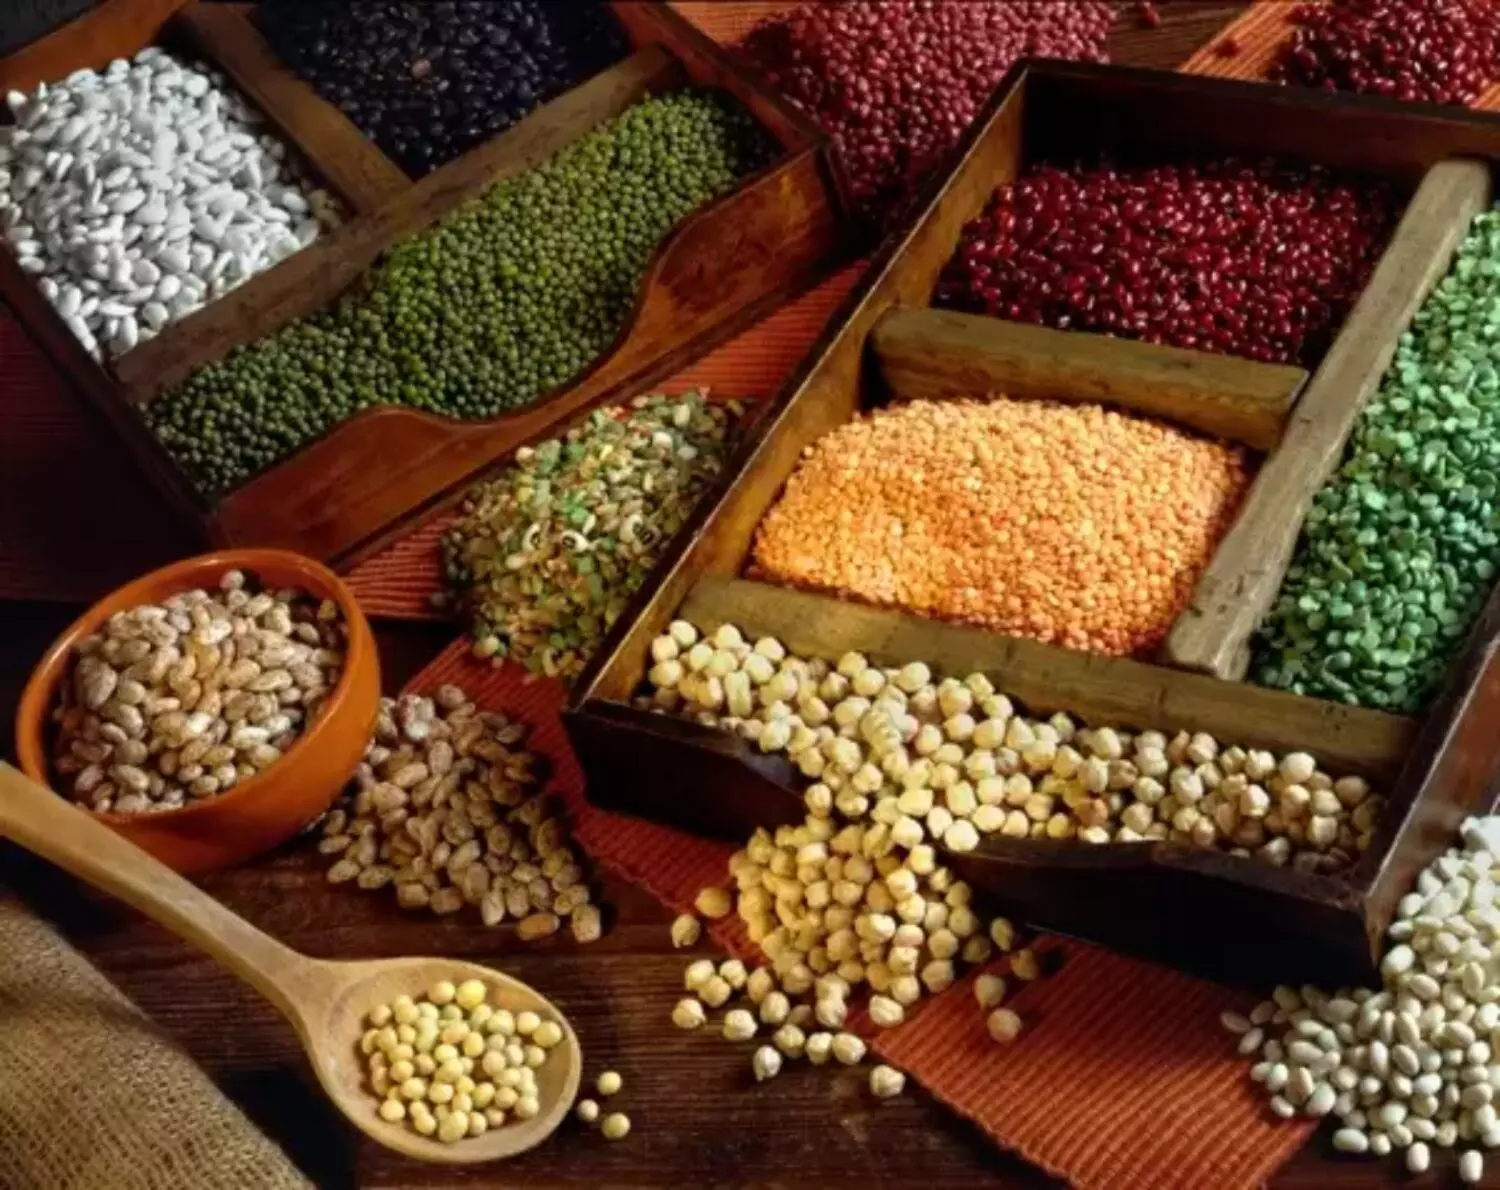 Pulses are beneficial in diabetes